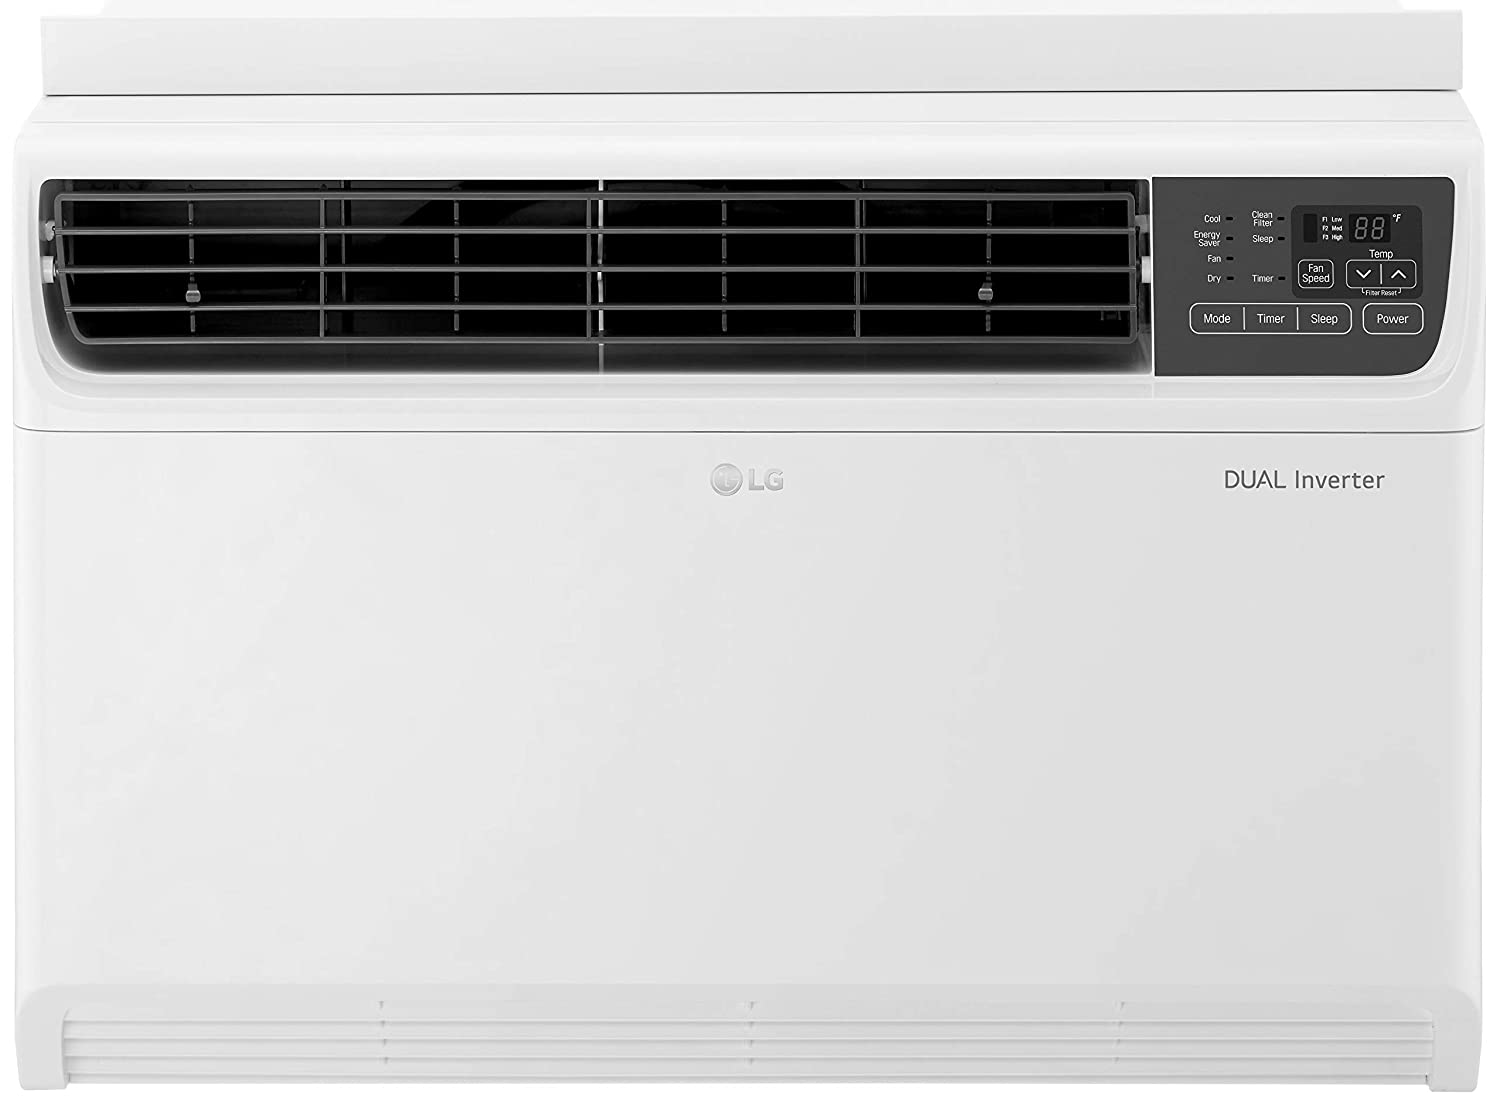 Amazon Deal: Price Competitive Window ACs Of Brands Like Voltas, LG On Sale - Details Here